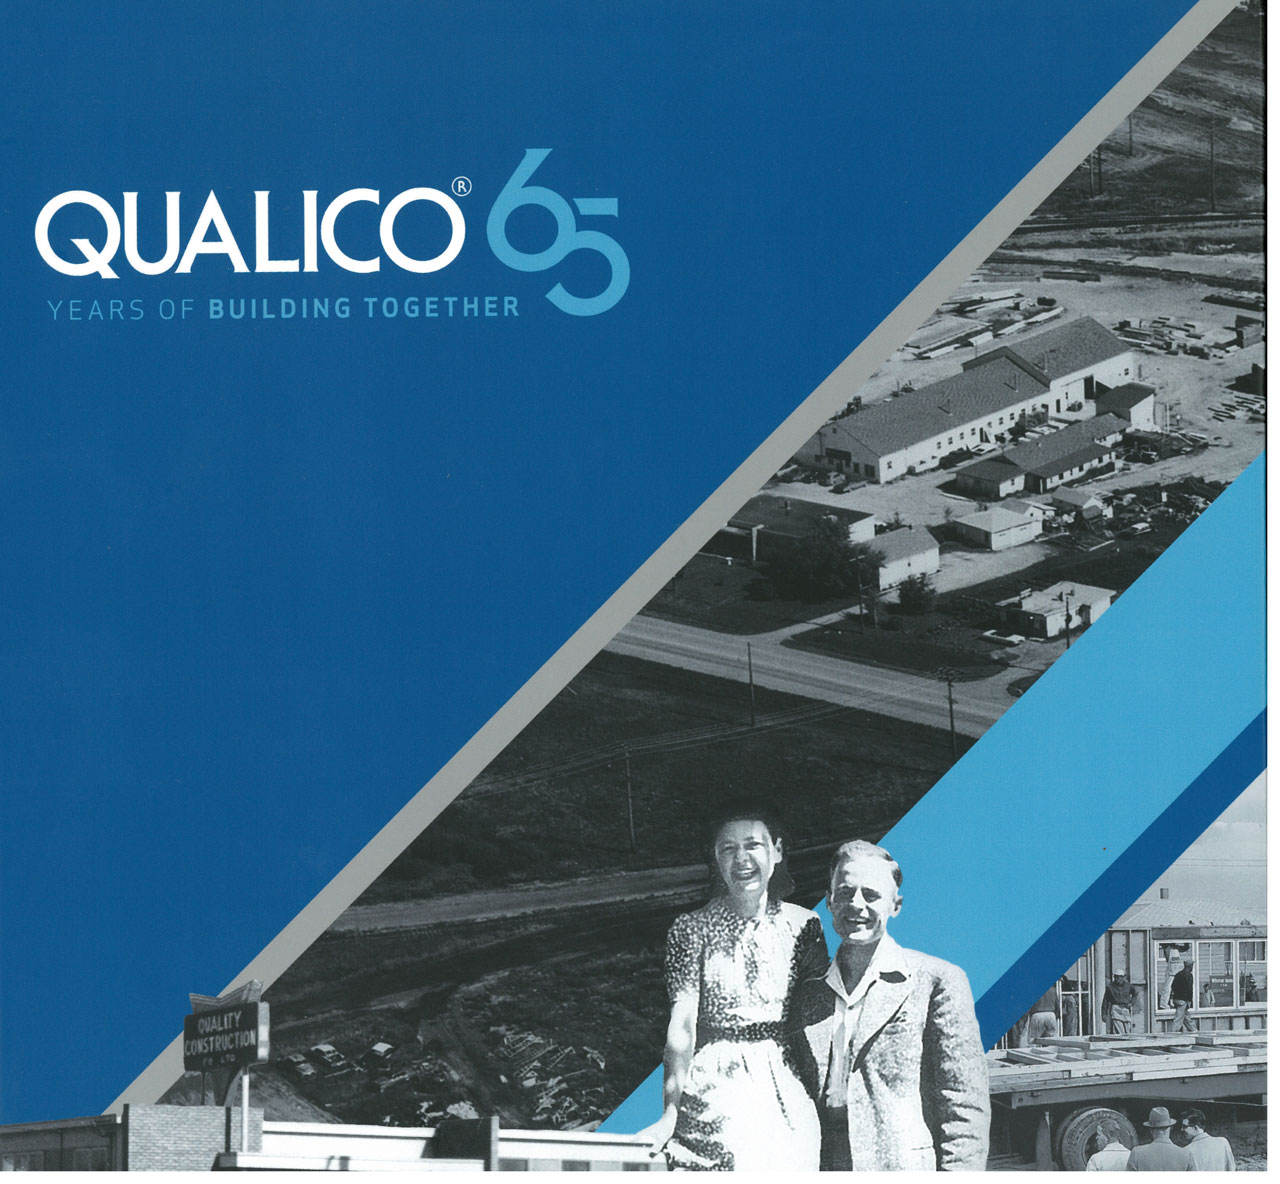 2016-2011 Qualico 65 Years of Building together